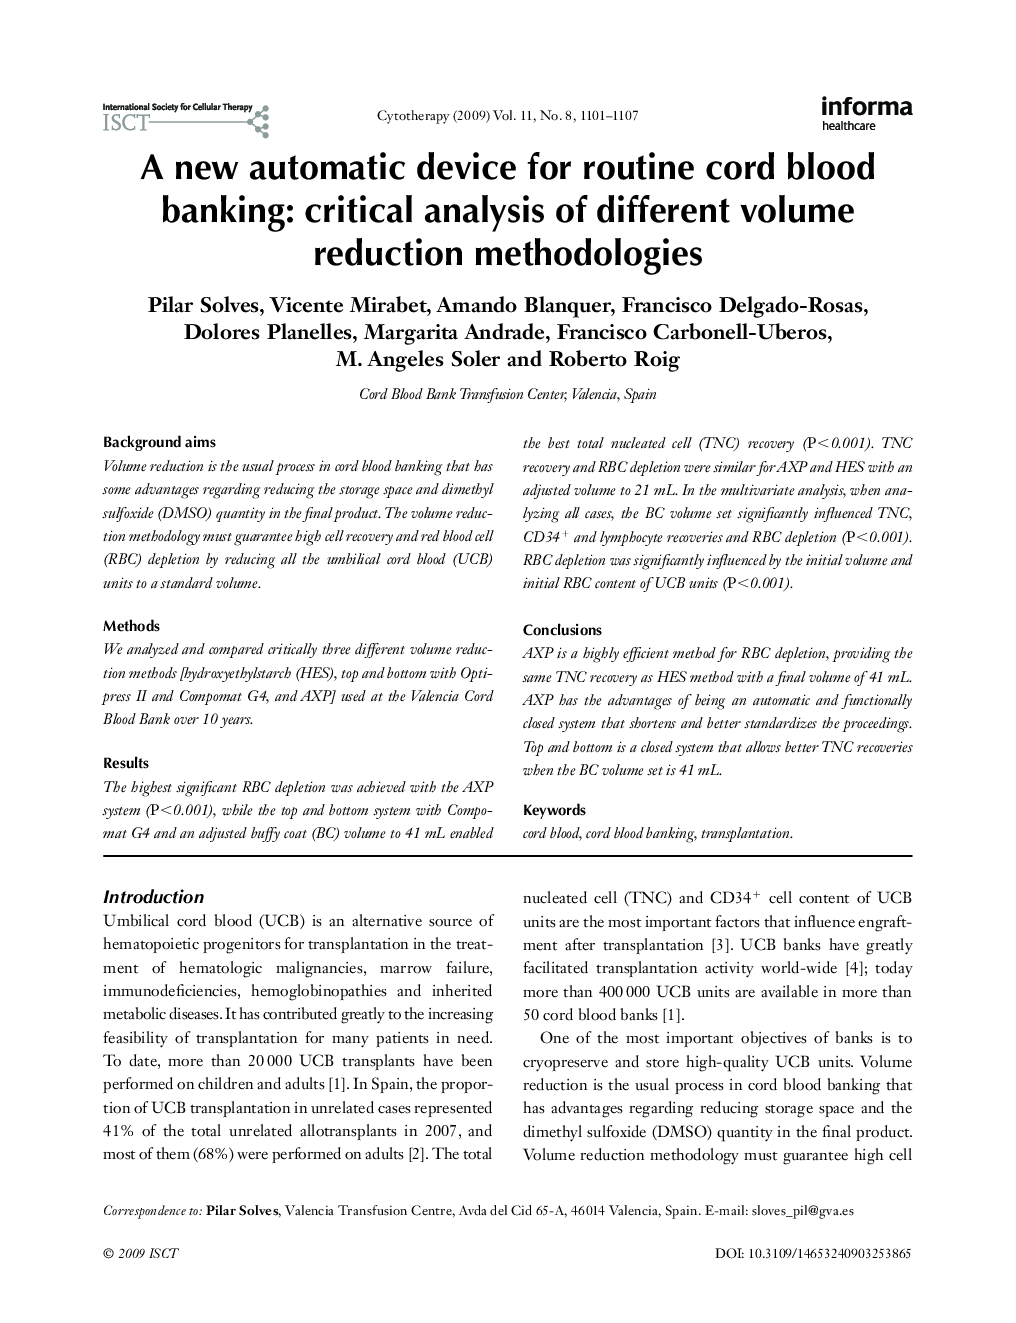 A new automatic device for routine cord blood banking: critical analysis of different volume reduction methodologies